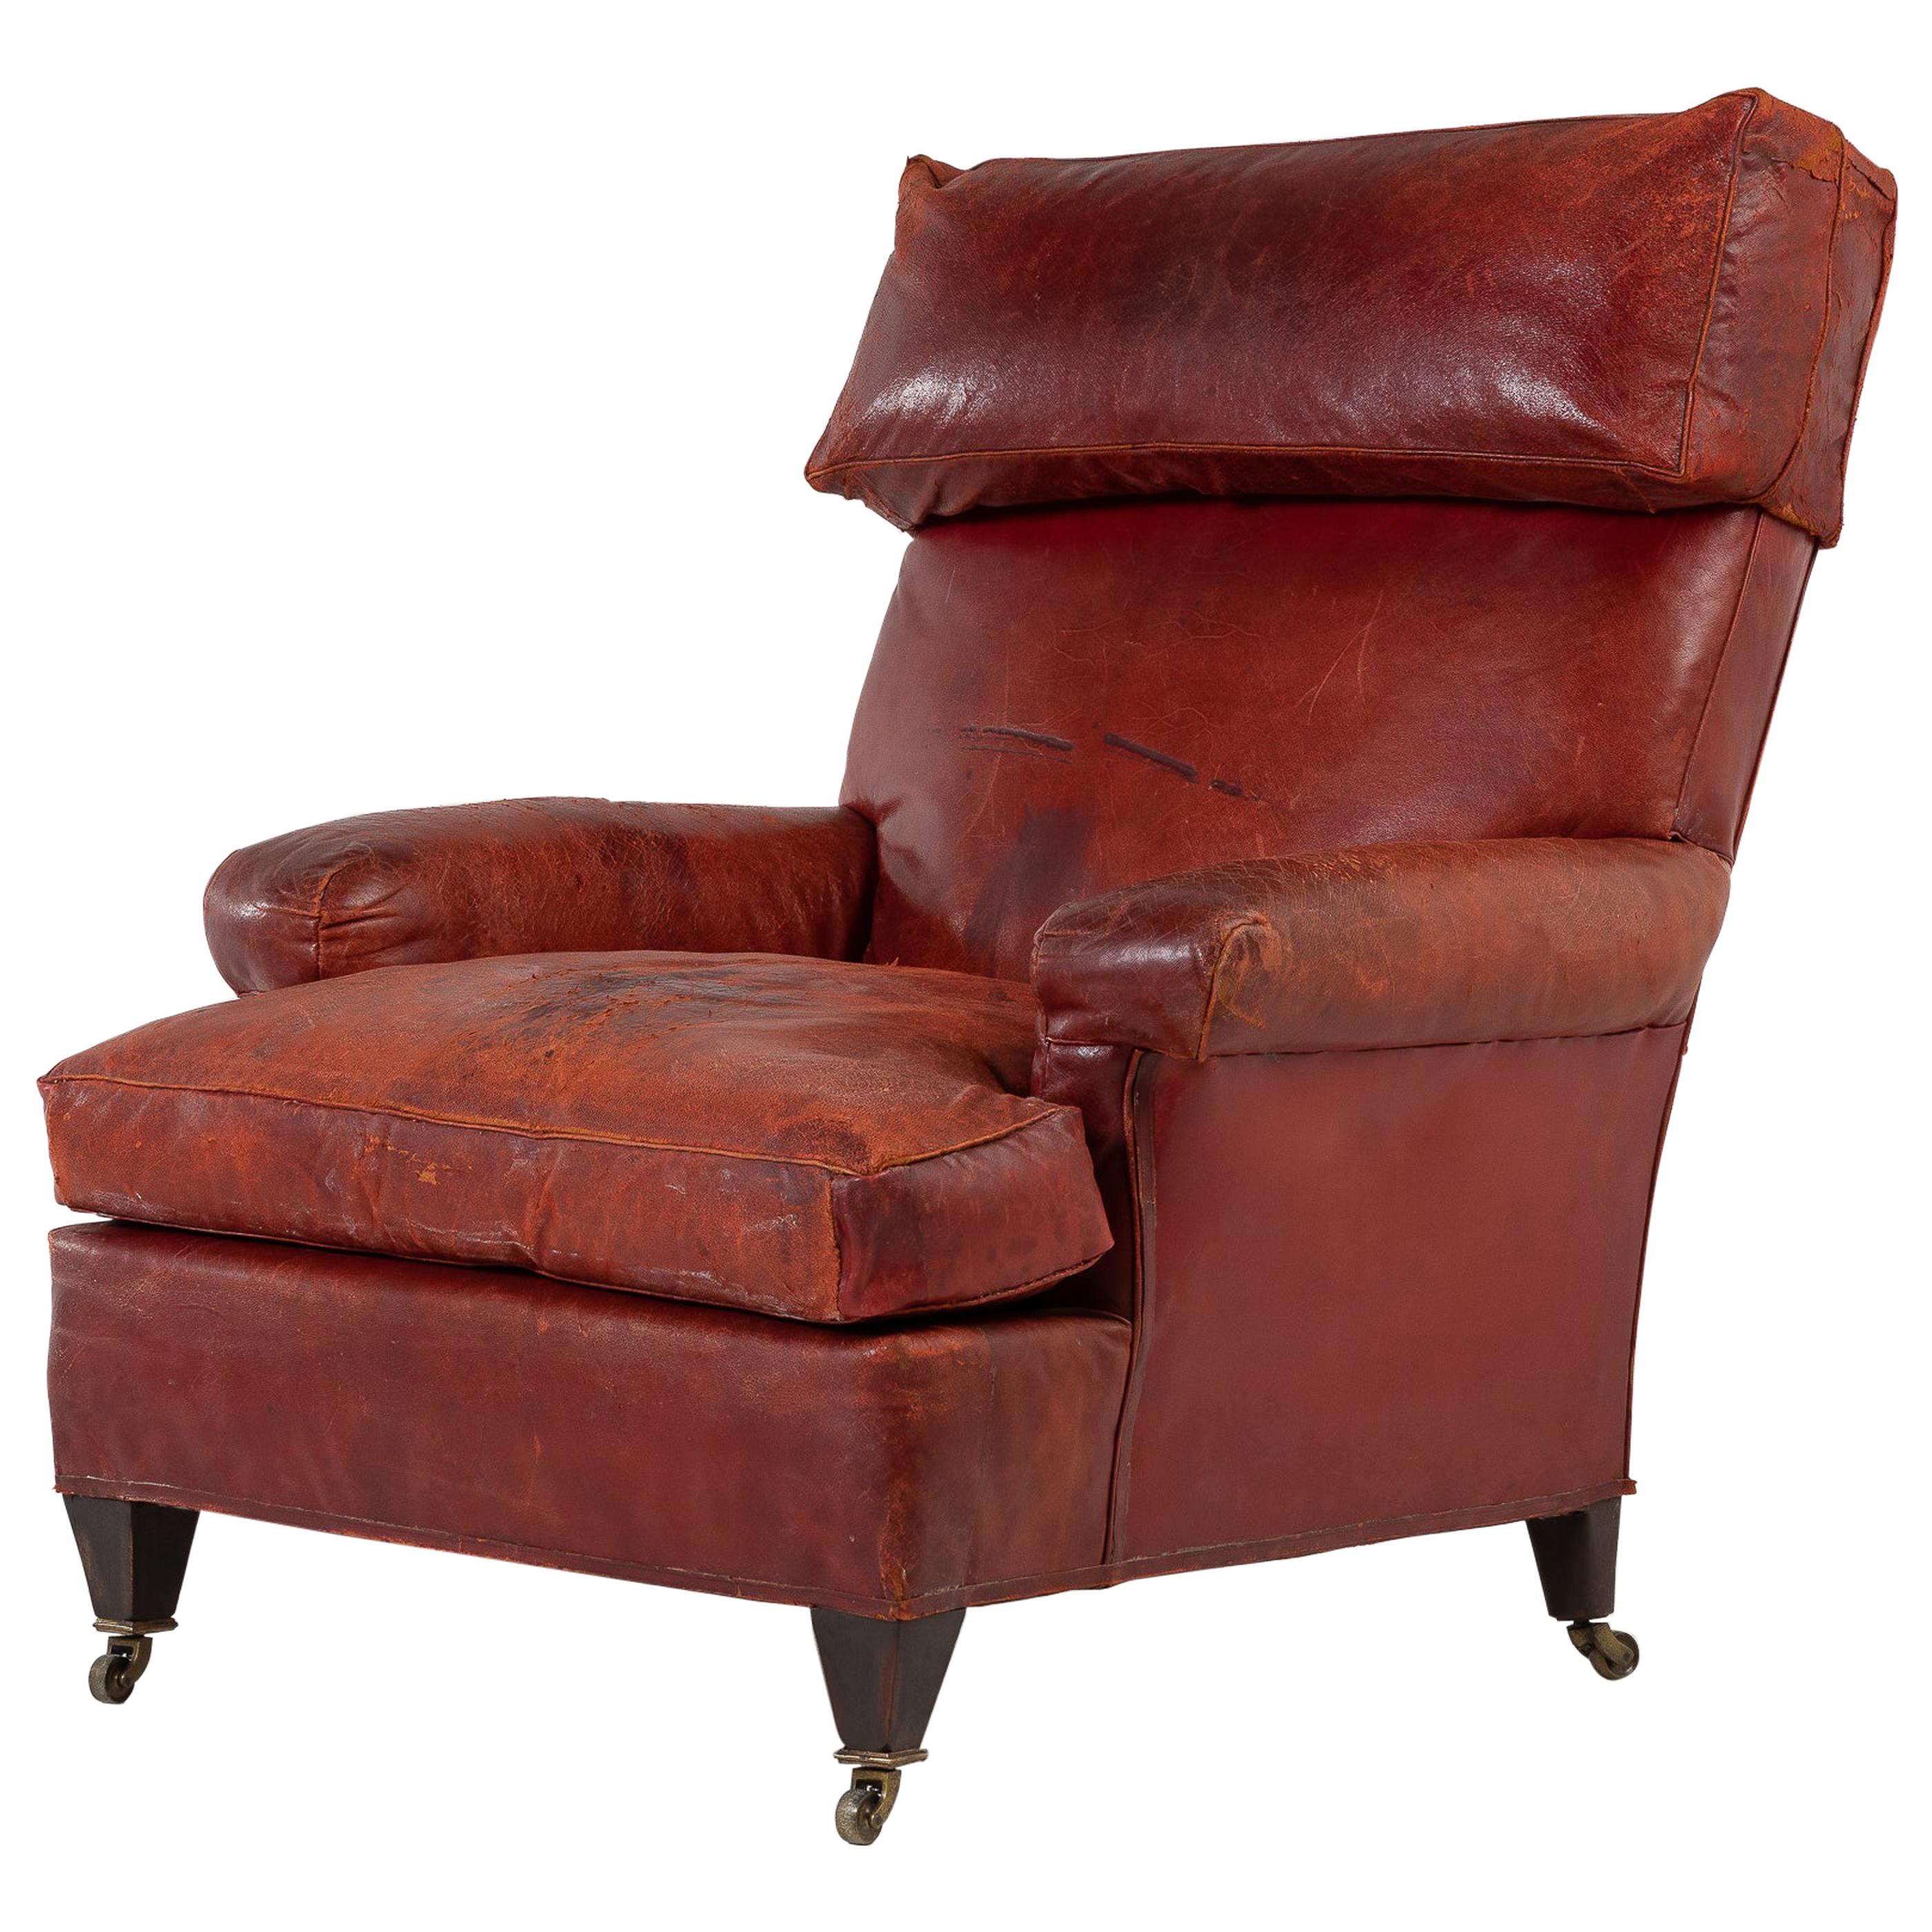 Large Scale 19th Century French Red Leather Armchair